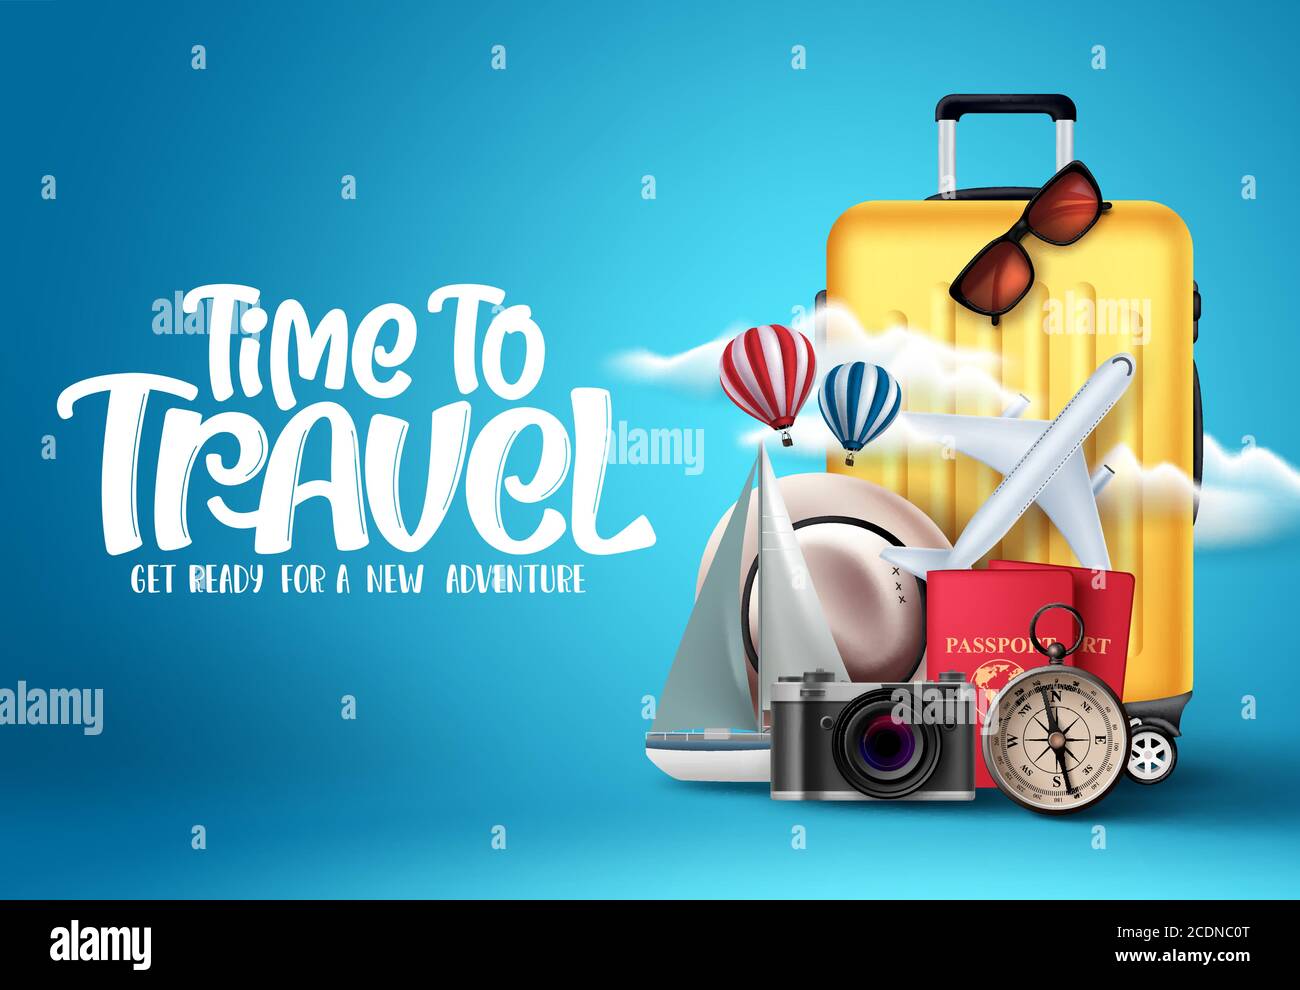 Time to travel vector design. Time to travel text in empty space with traveling elements like luggage, bags, passport, camera and compass in blue back Stock Vector